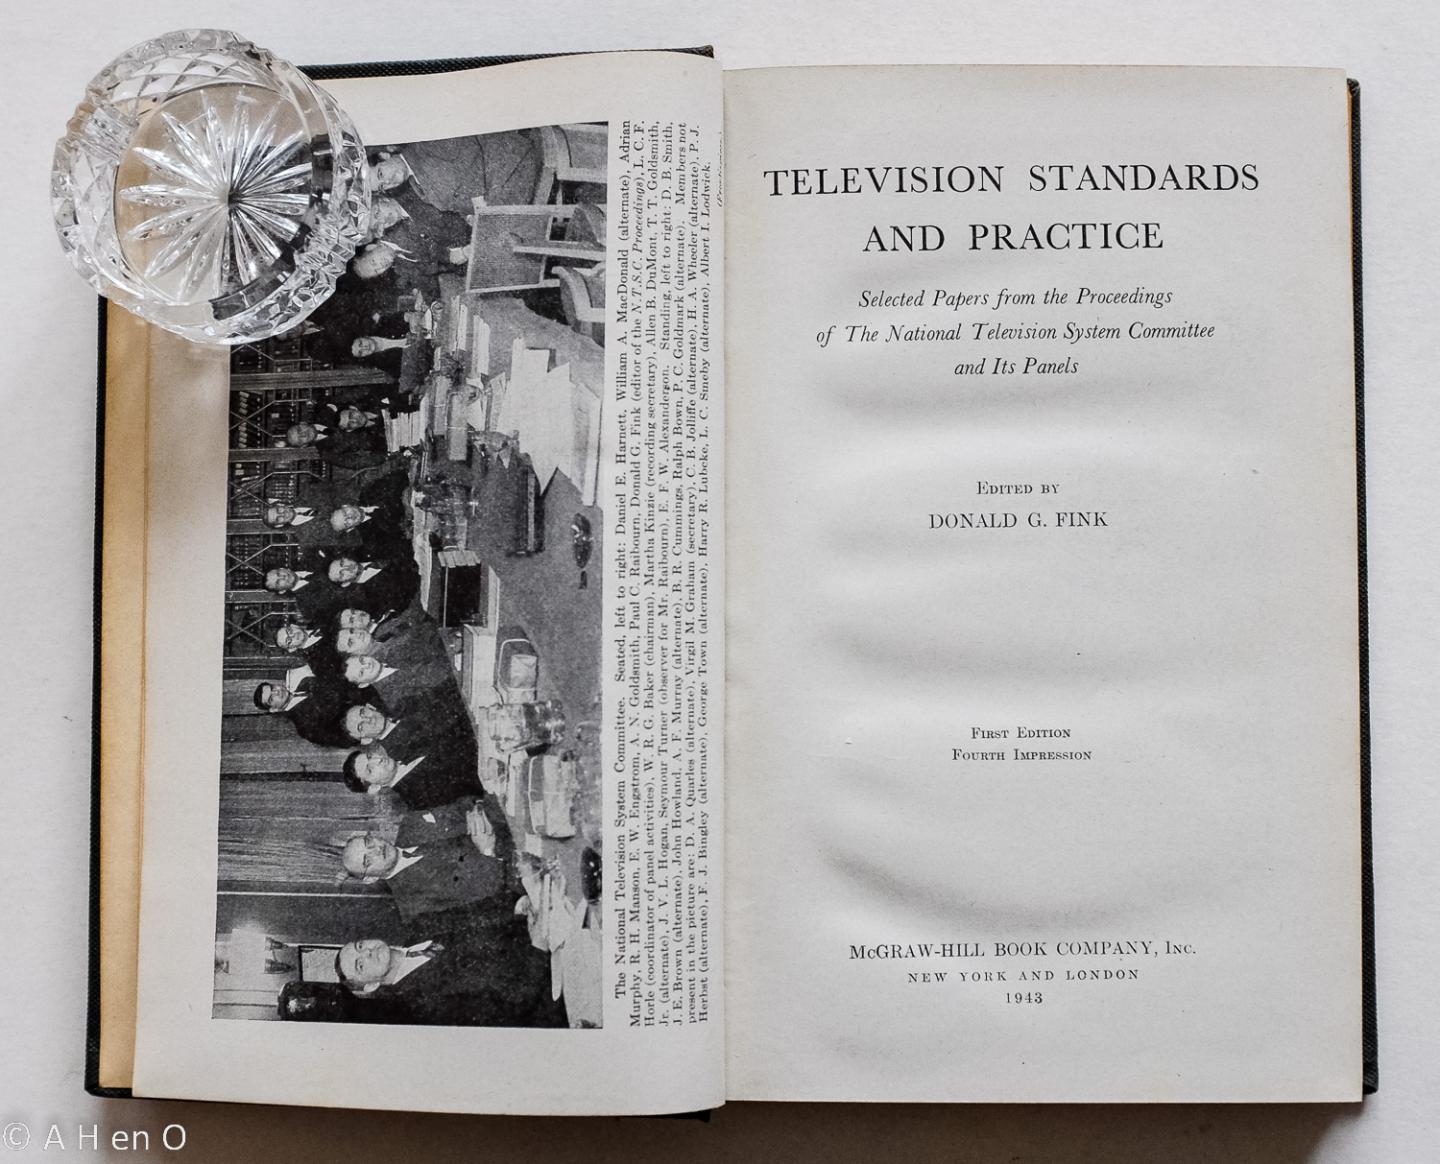 National Television System Committee (U.S.) - Television standards and practice; selected papers from the Proceedings of the National television system committee and its panels